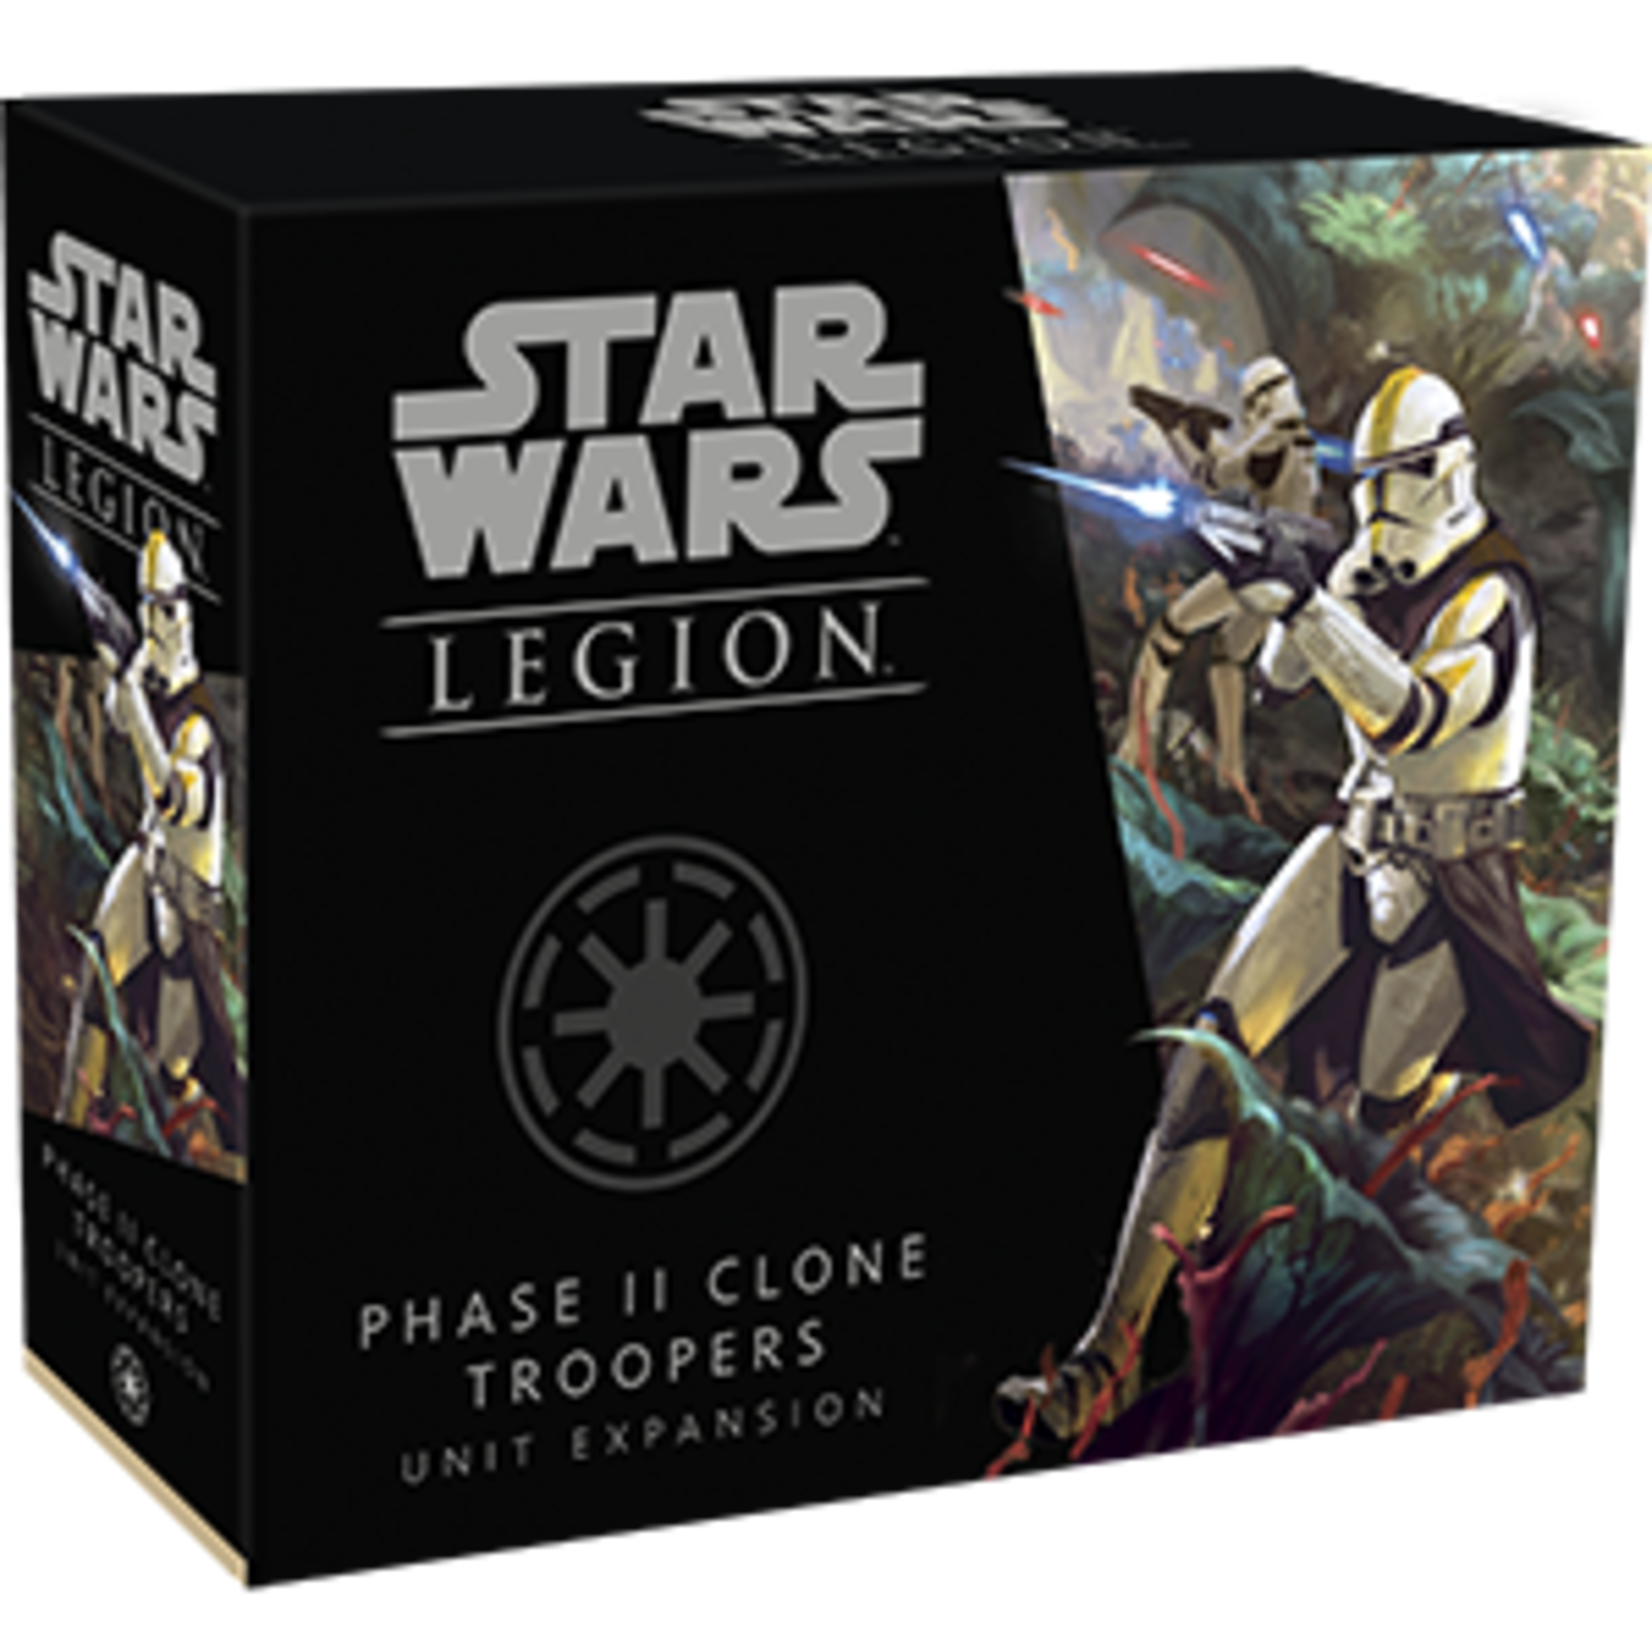 Star wars: Legion Phase II Clone Troopers Unit Expansion